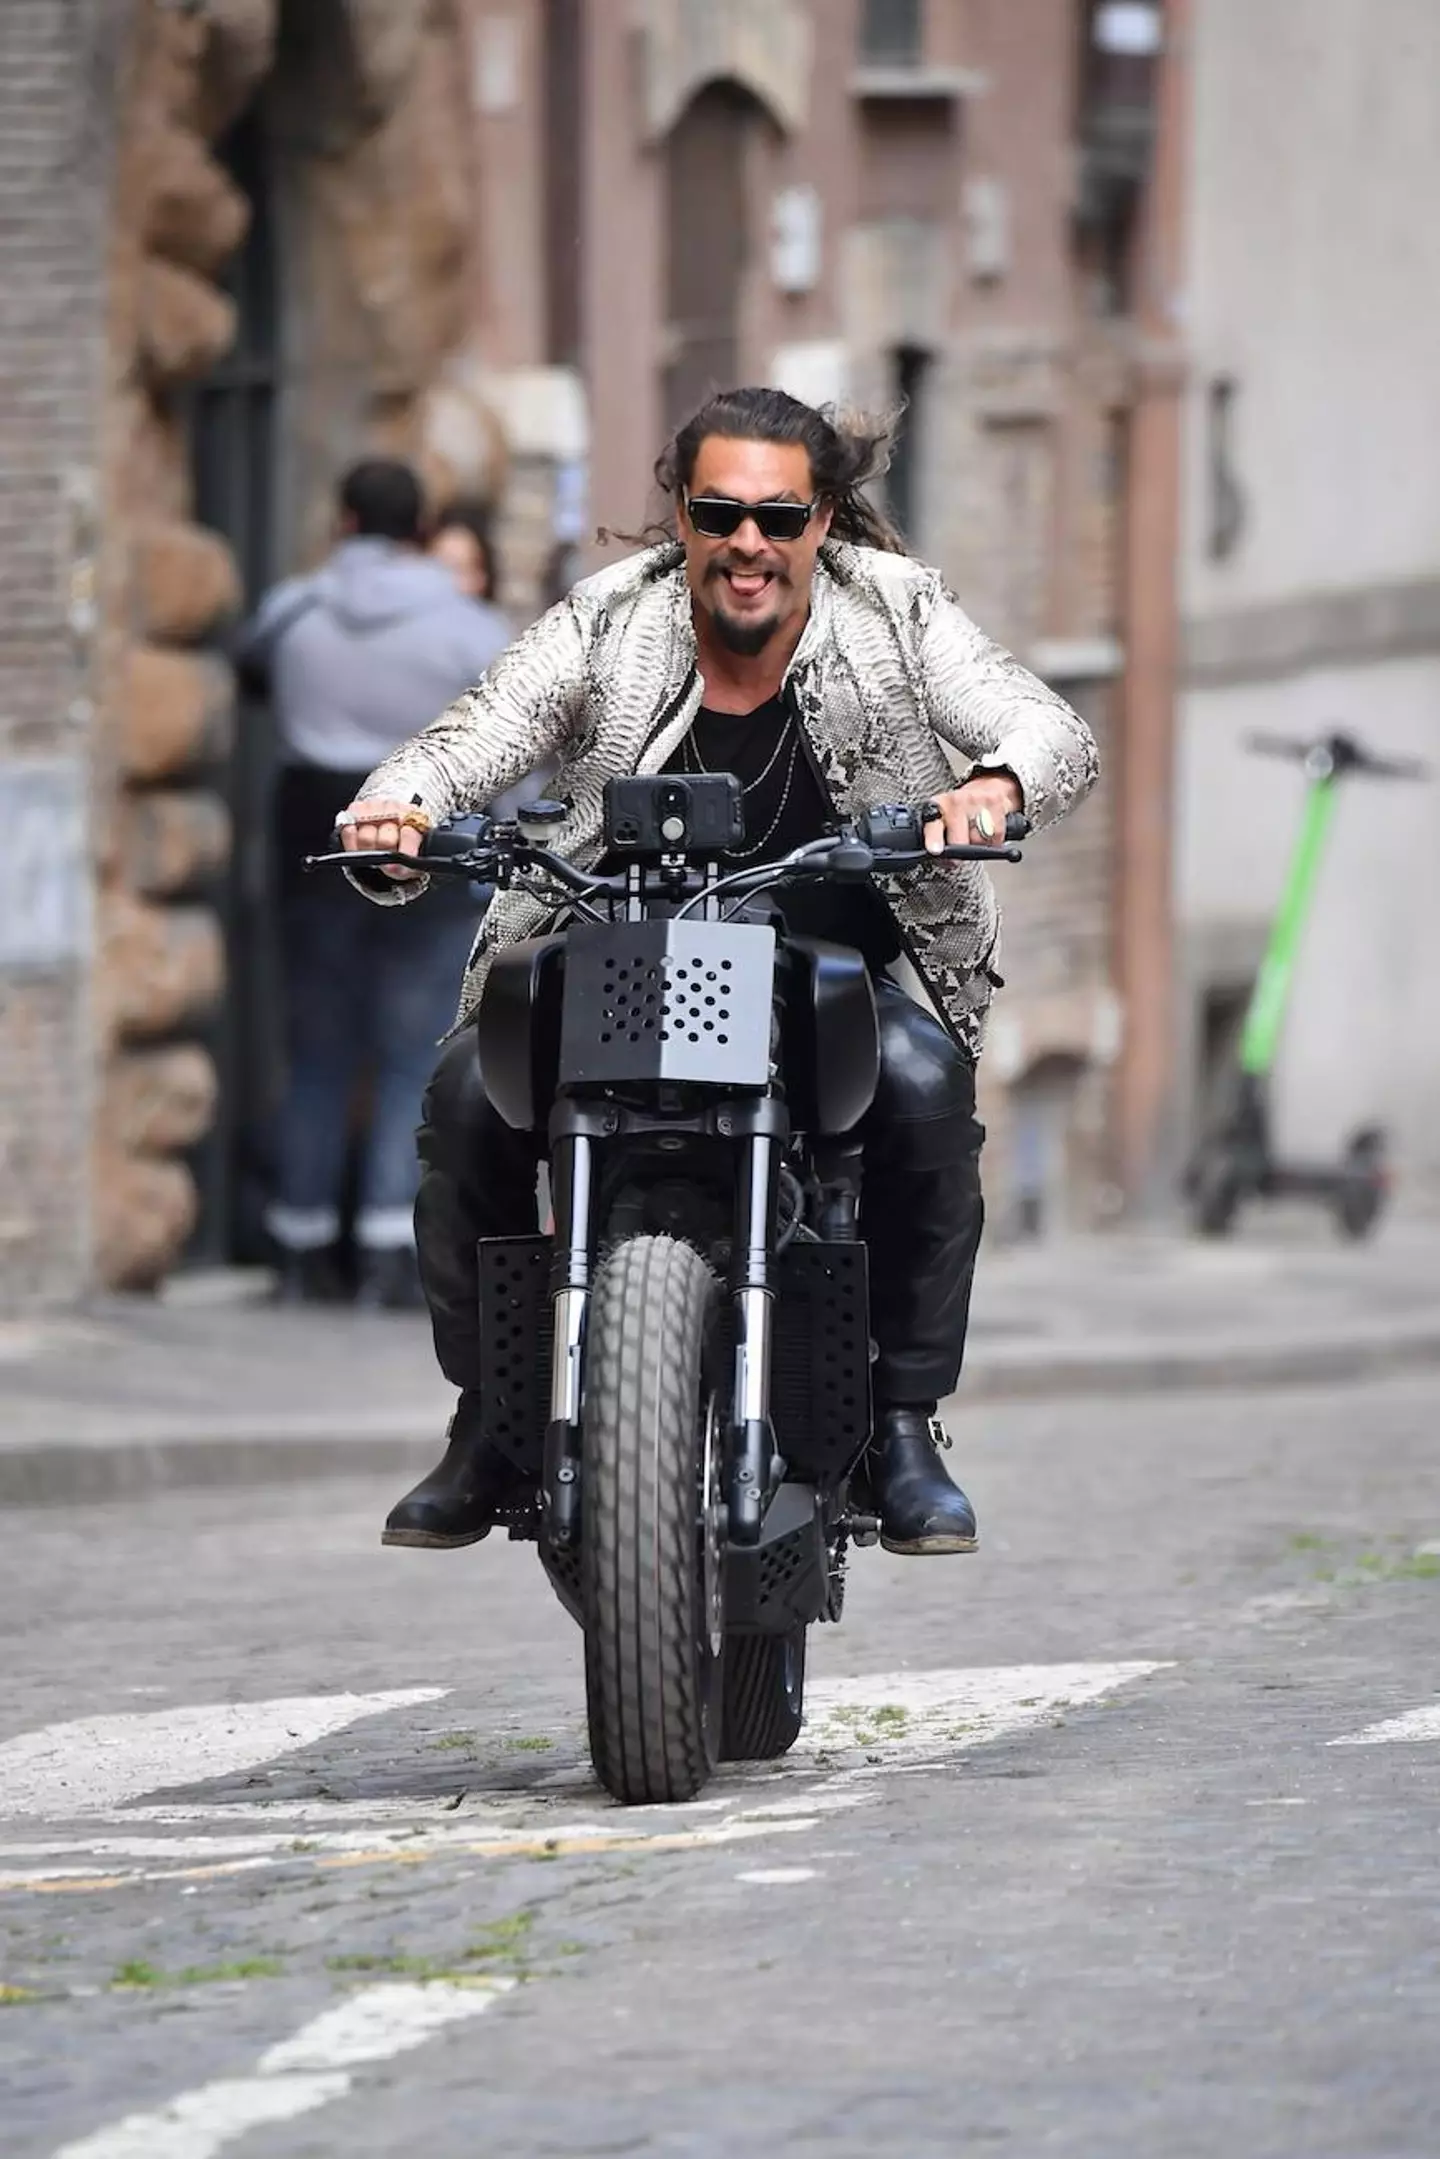 Jason Momoa was spotted on the set of Fast X.